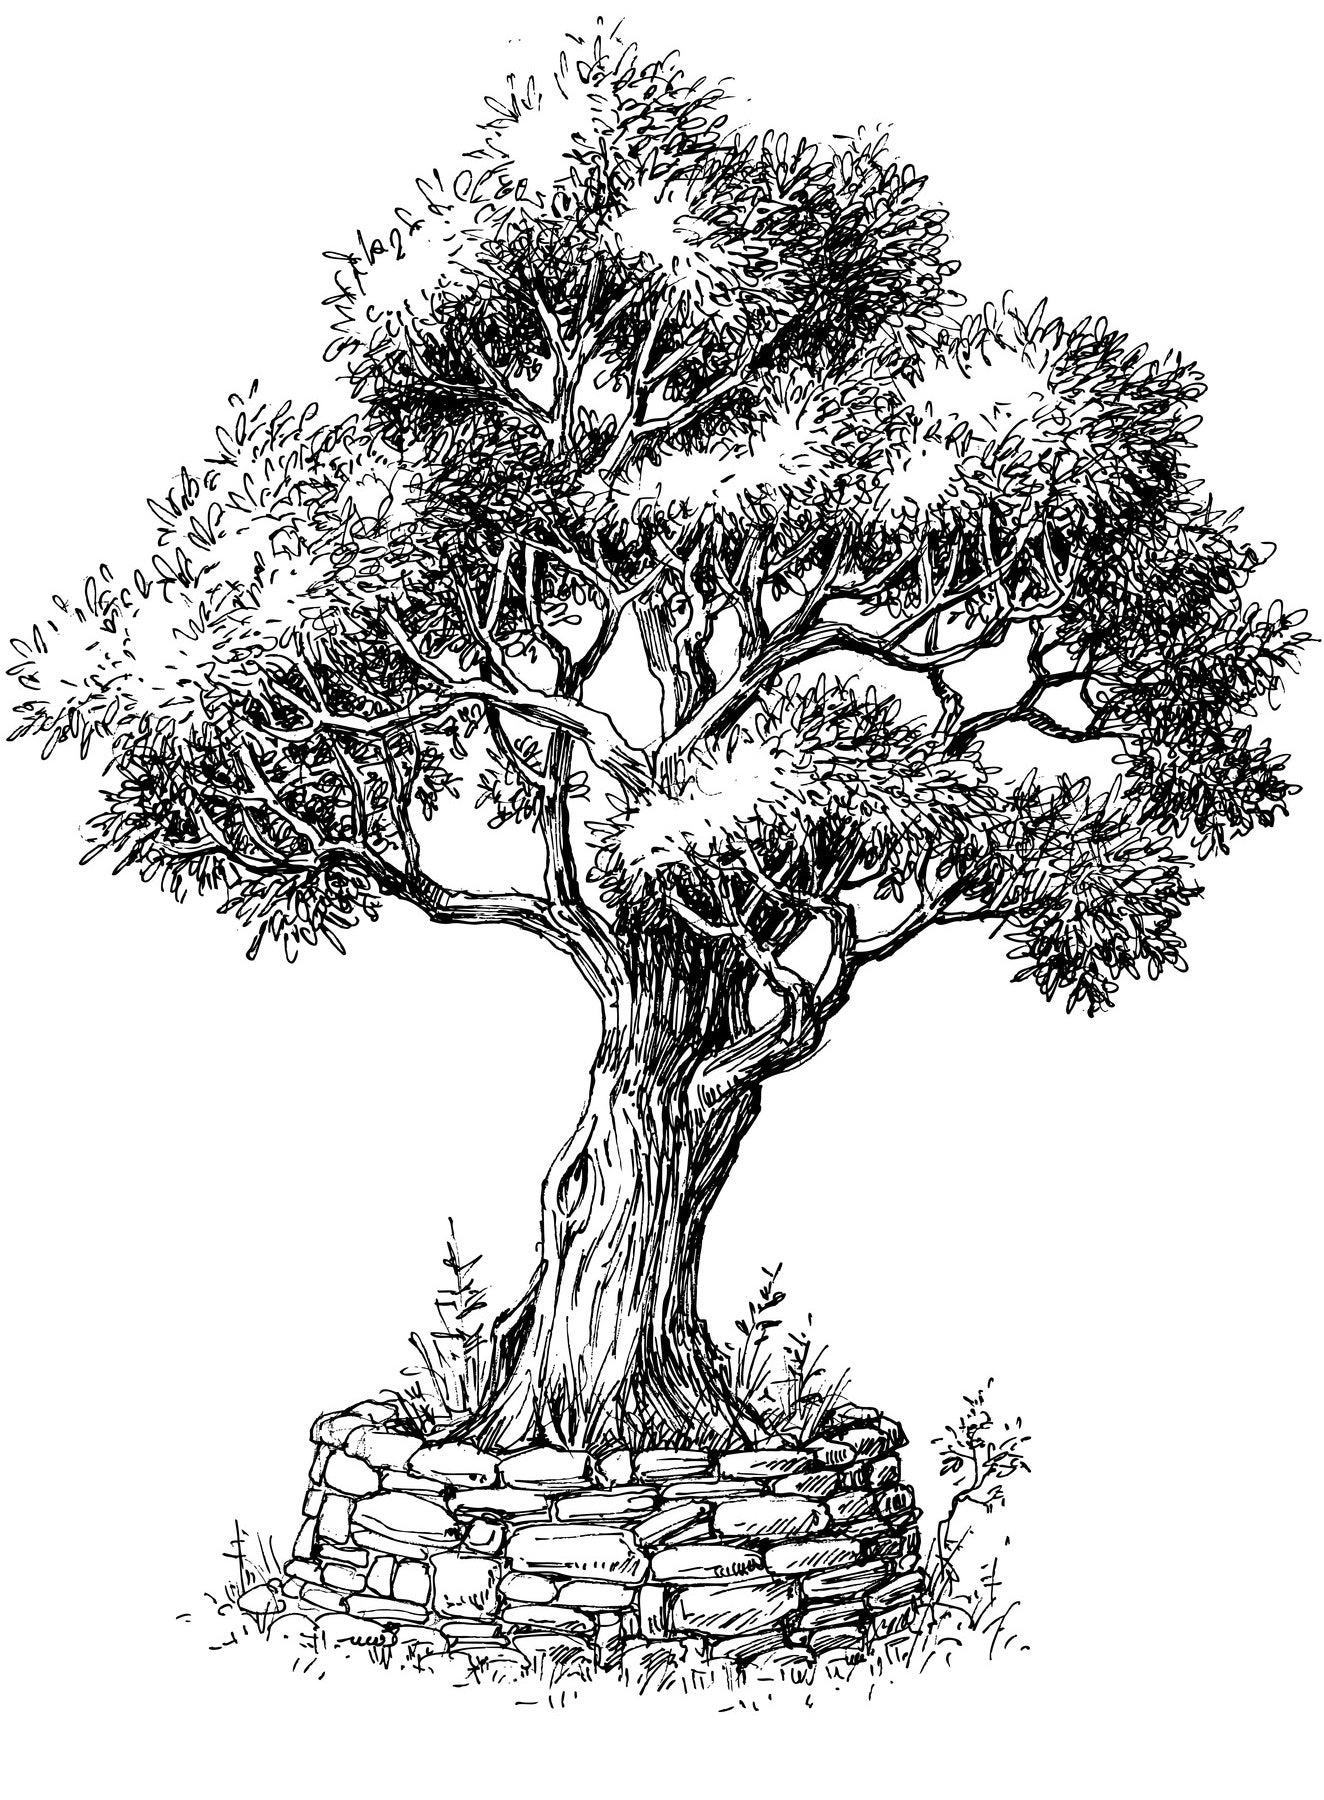 Trees - Forests, Woods & Lonely Tree Landscapes, 44 Artist's Drawings PDF Coloring Book